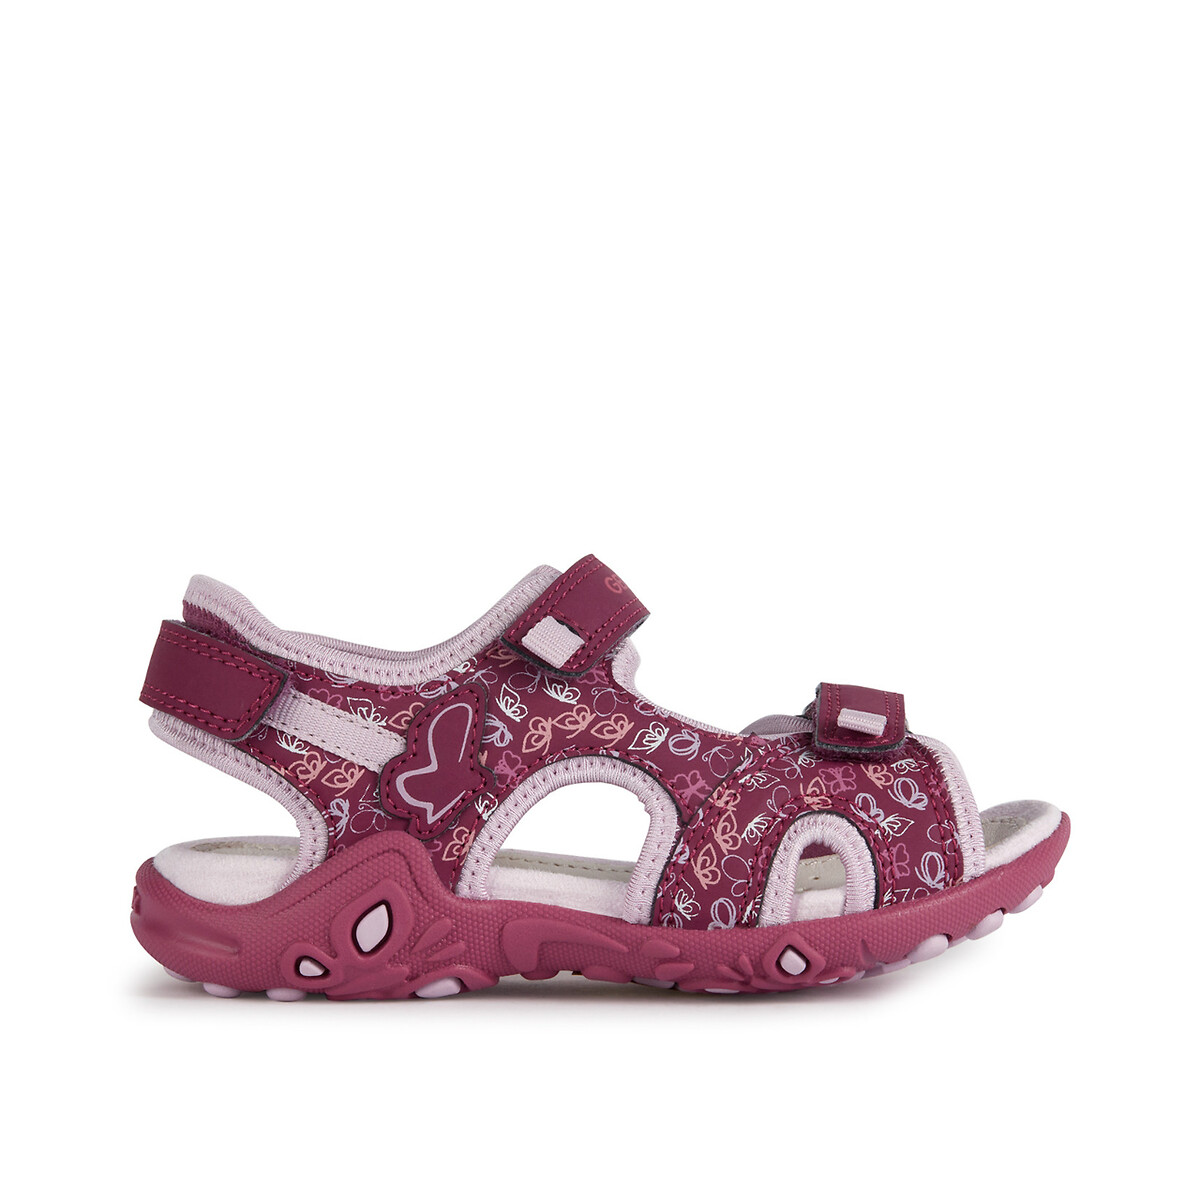 Kids whinberry breathable sandals with touch 'n' close fastening, dark ...